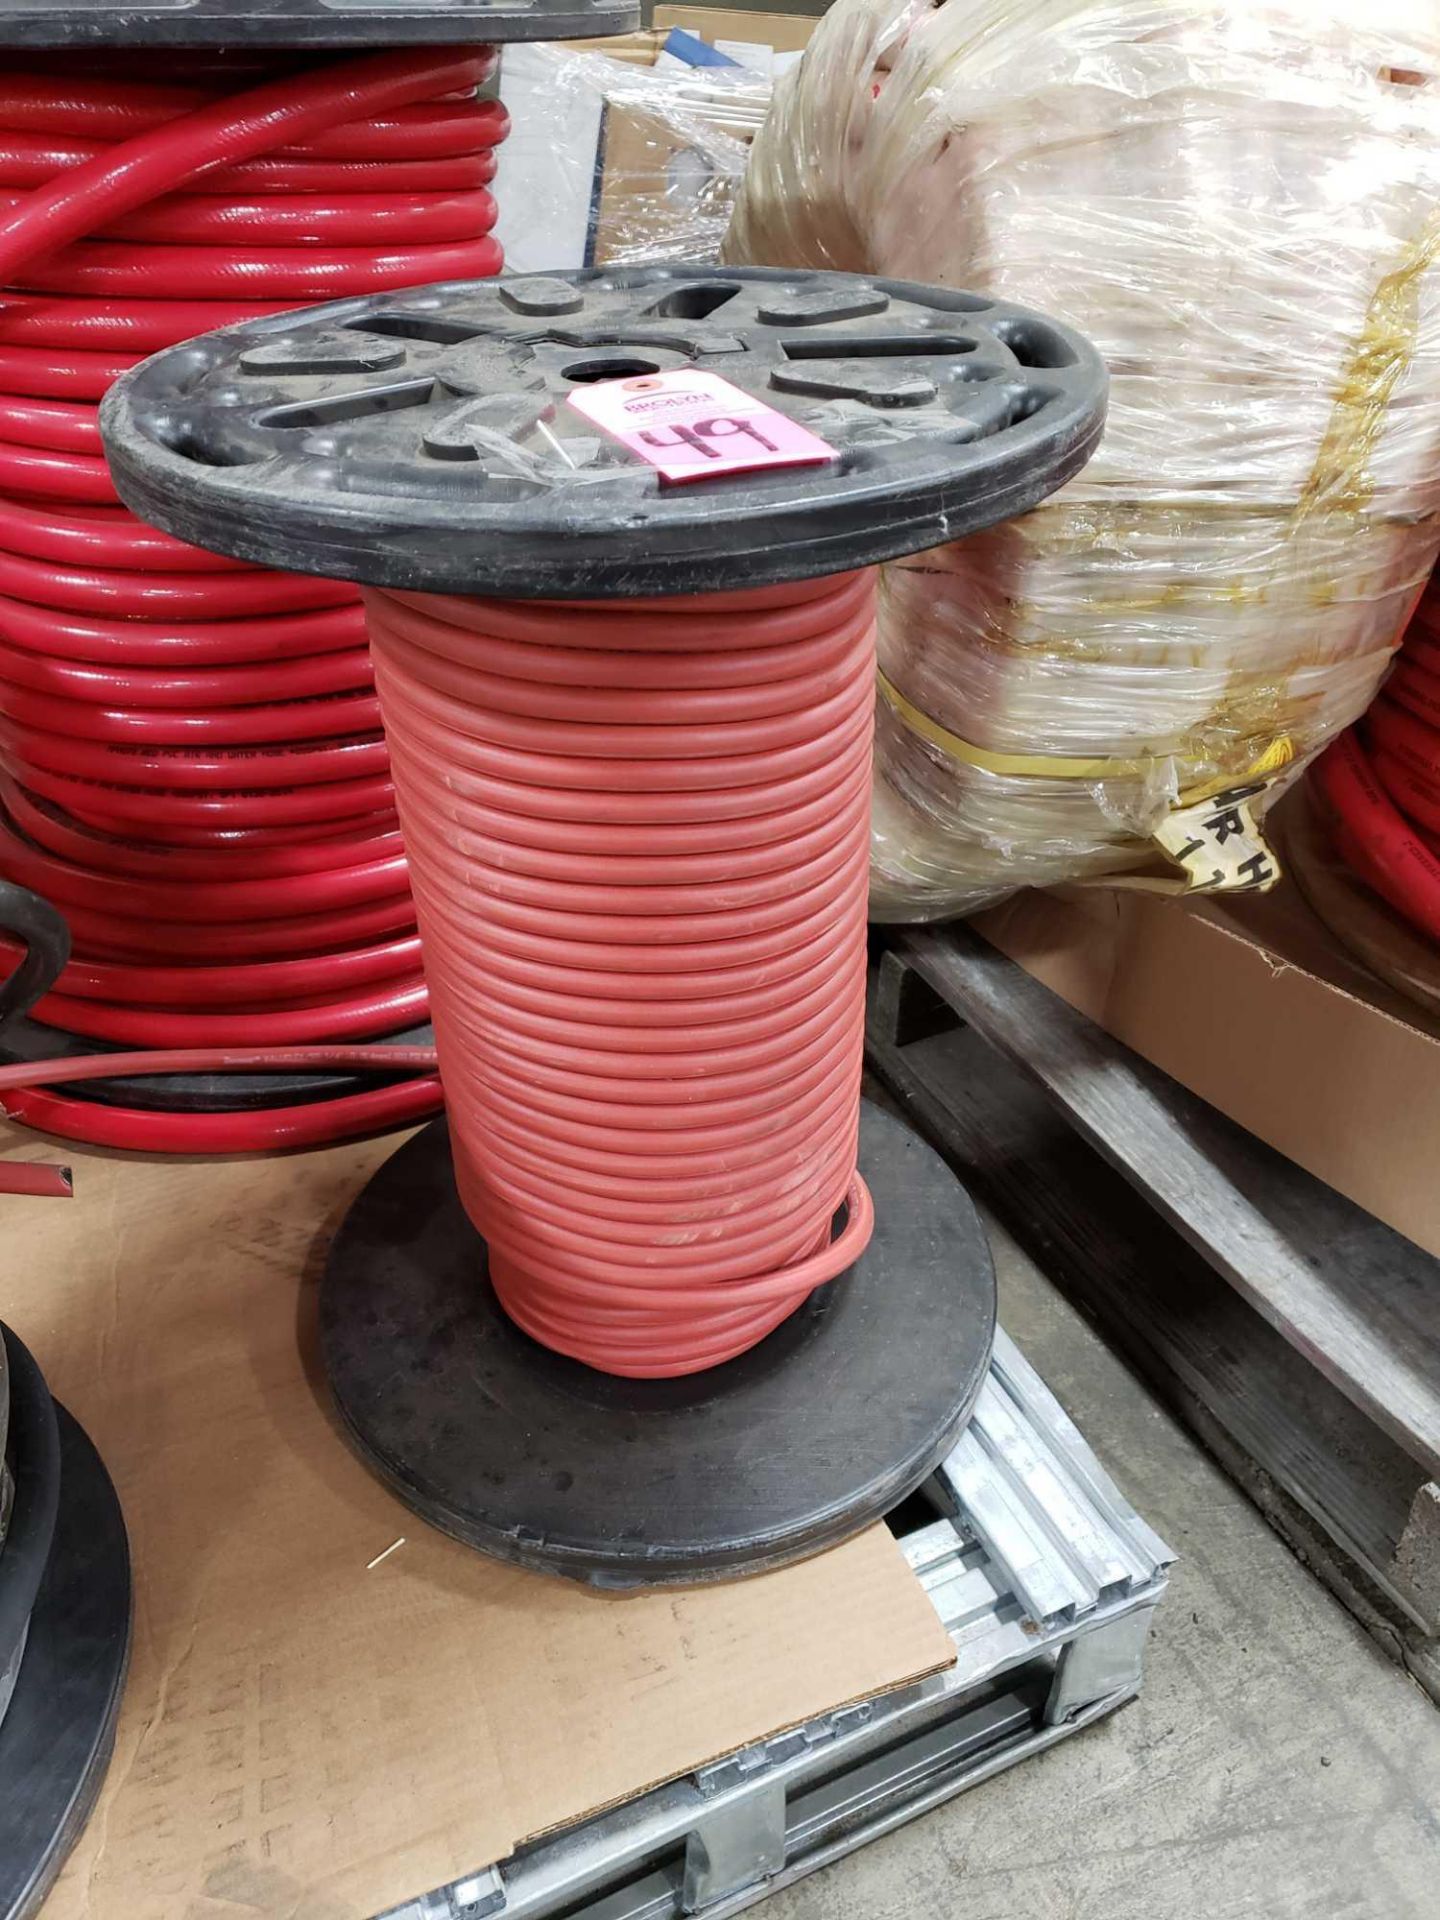 spool of air and water hose. New as pictured.